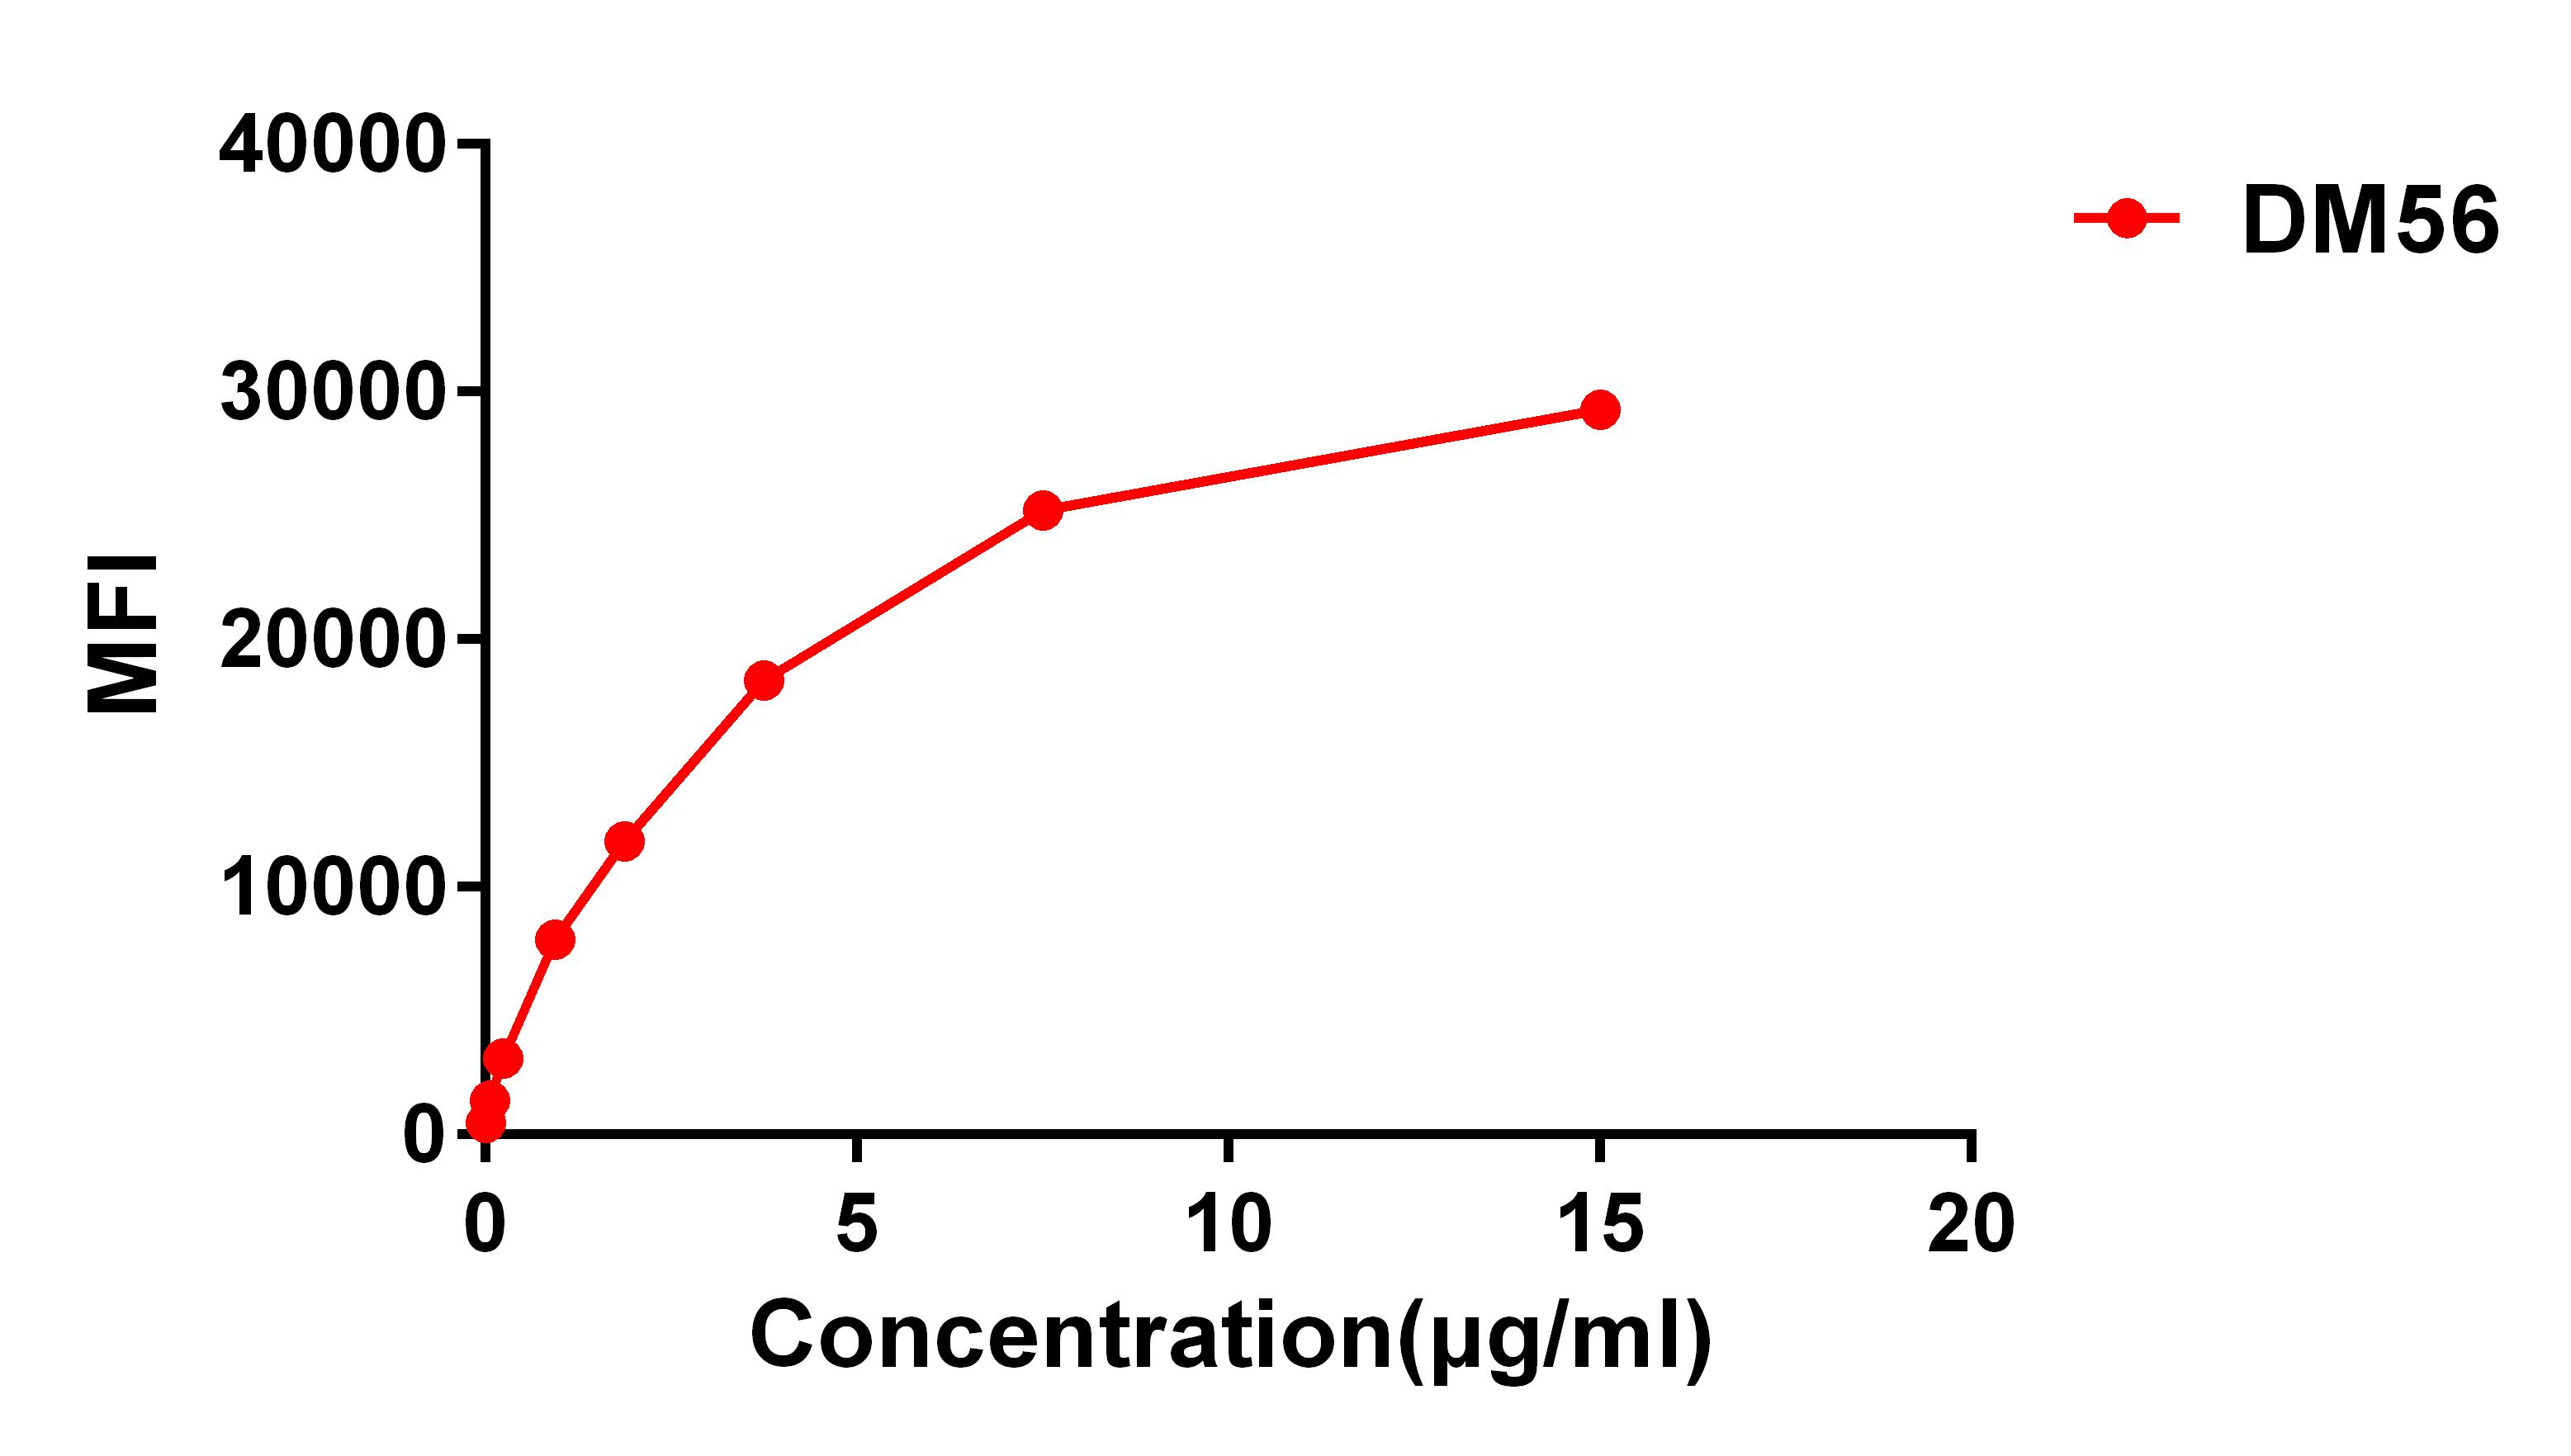 Figure 2. FACS data of serially titrated Rabbit anti-CD138 monoclonal antibody (clone: DM56) on H929 cells. The Y-axis represents the mean fluorescence intensity (MFI) while the X-axis represents the concentration of IgG used.